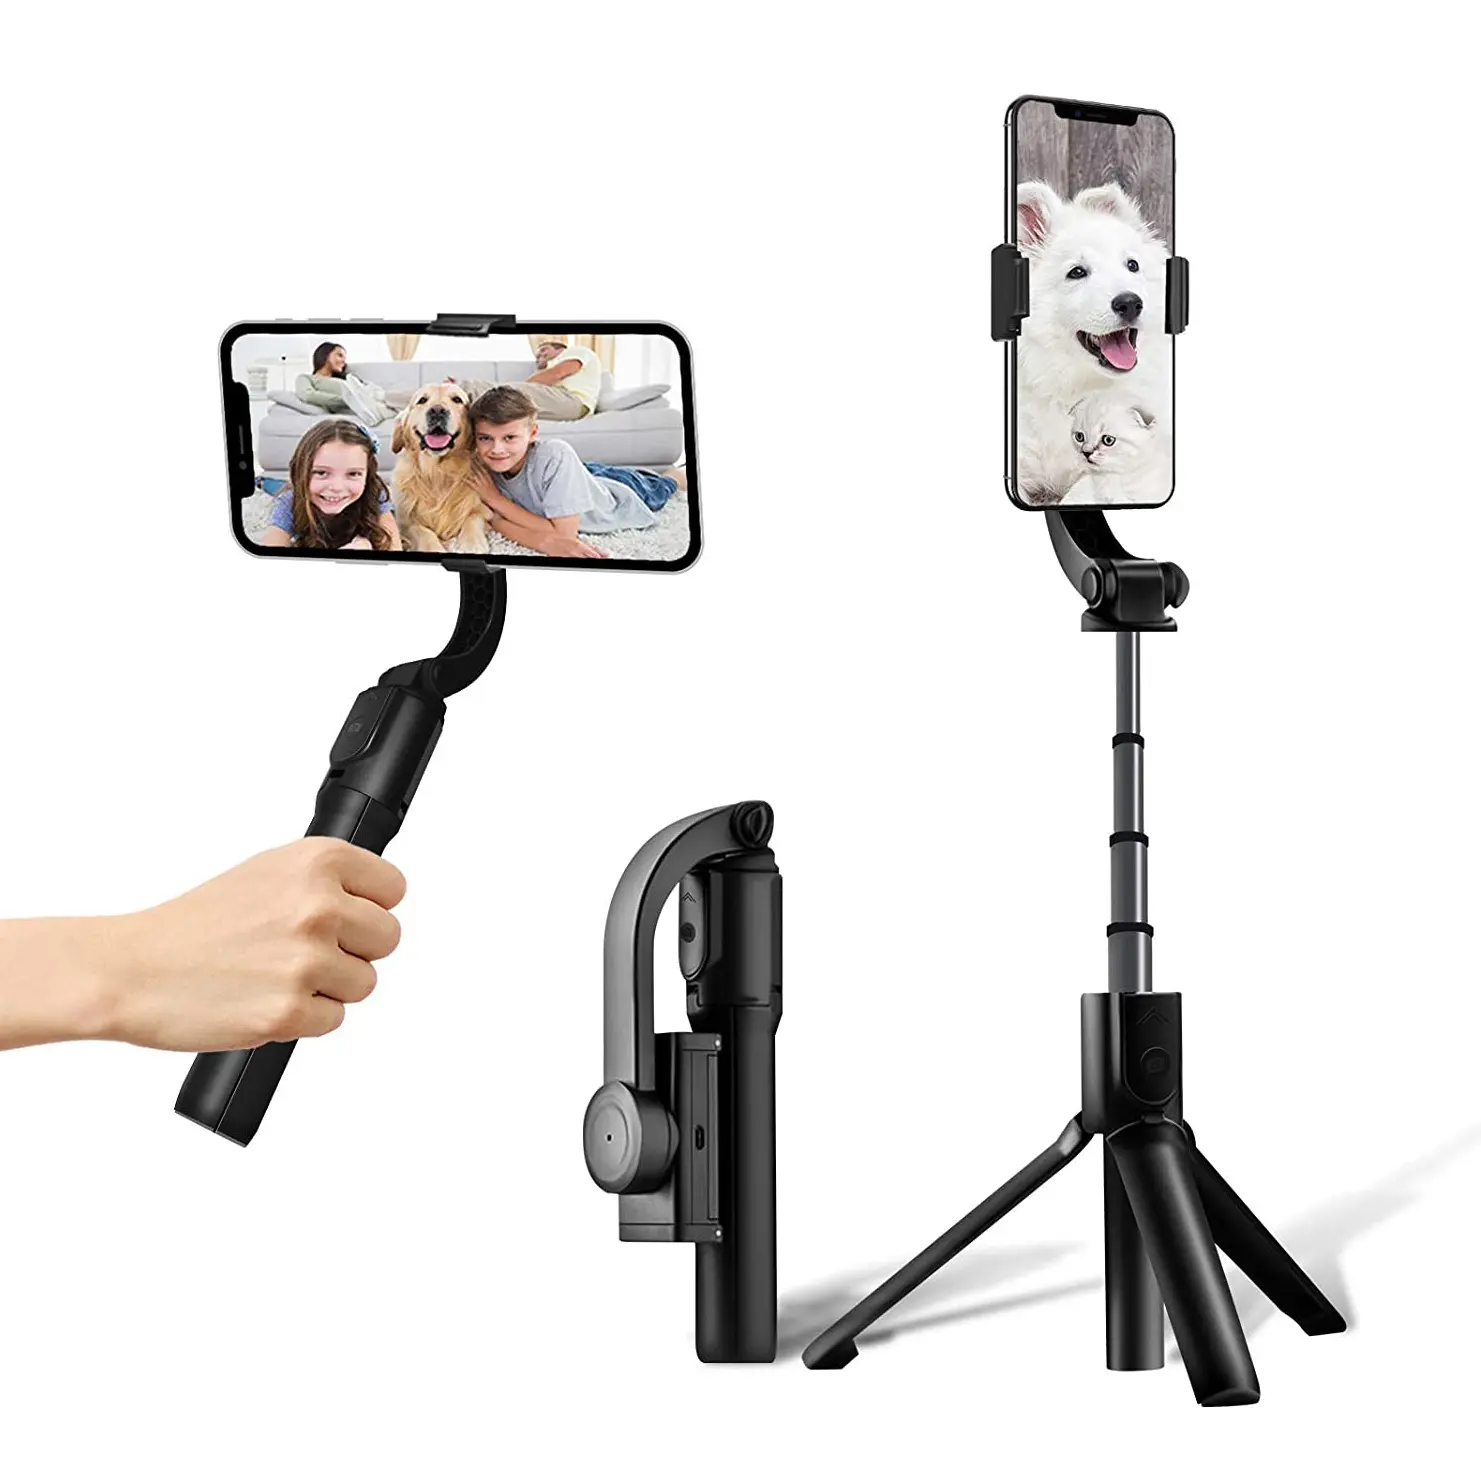 Selfie Stick Mini Extendable Handheld Selfie Stick with Wireless Remote Mobile Gimbal Phone Holder with Lightweight Design